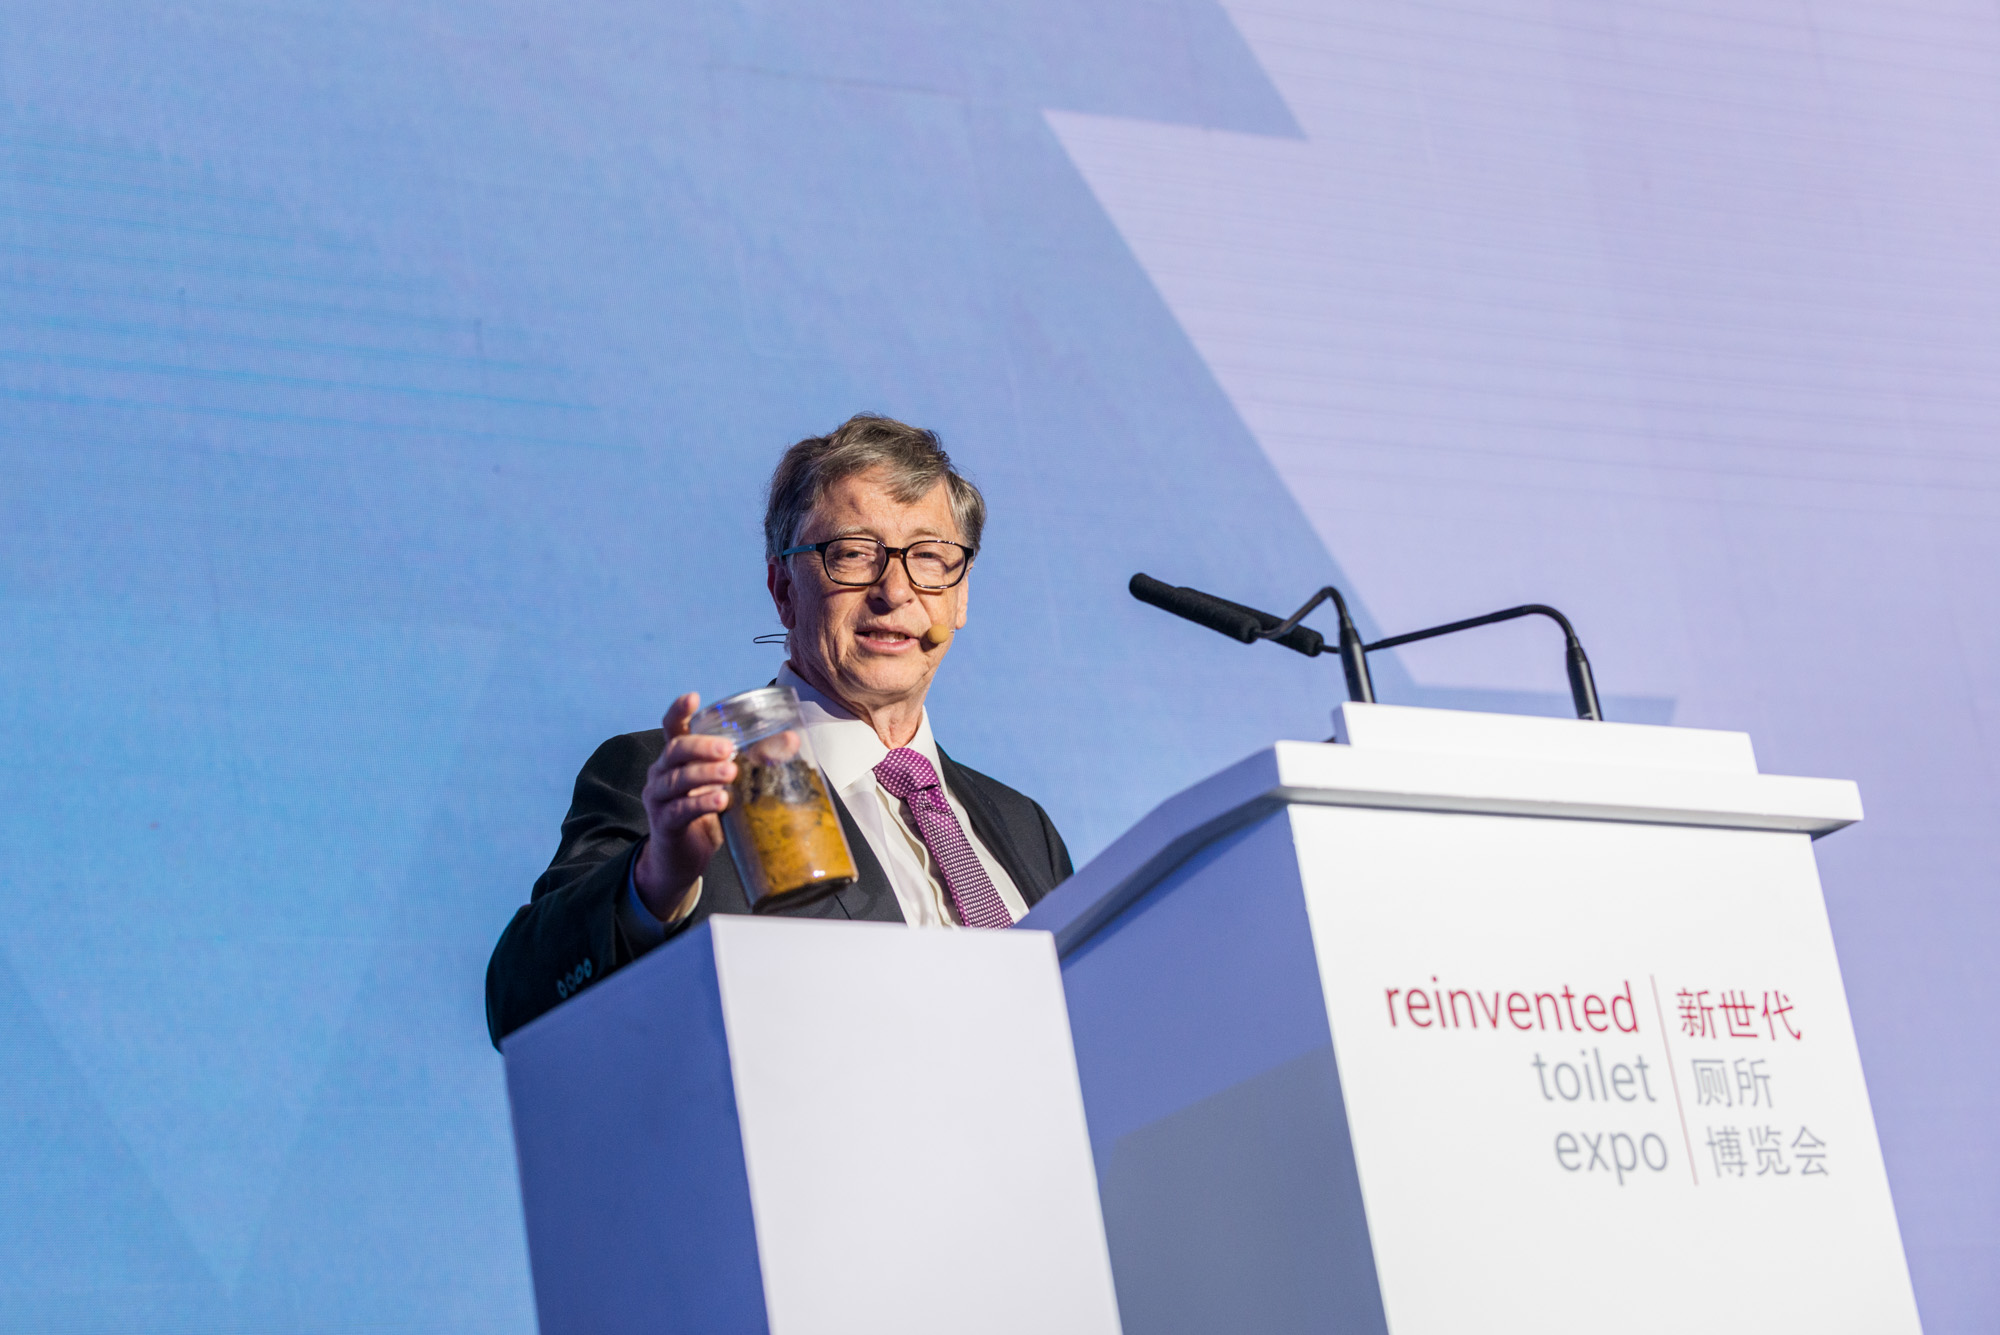 Bill Gates, founder of Microsoft and co-chair of the Bill & Melinda Gates Foundation speaks at the opening of the Reinvented Toilet Expo in Beijing, Nov. 6, 2018. [Photo courtesy of the Bill & Melinda Gates Foundation]